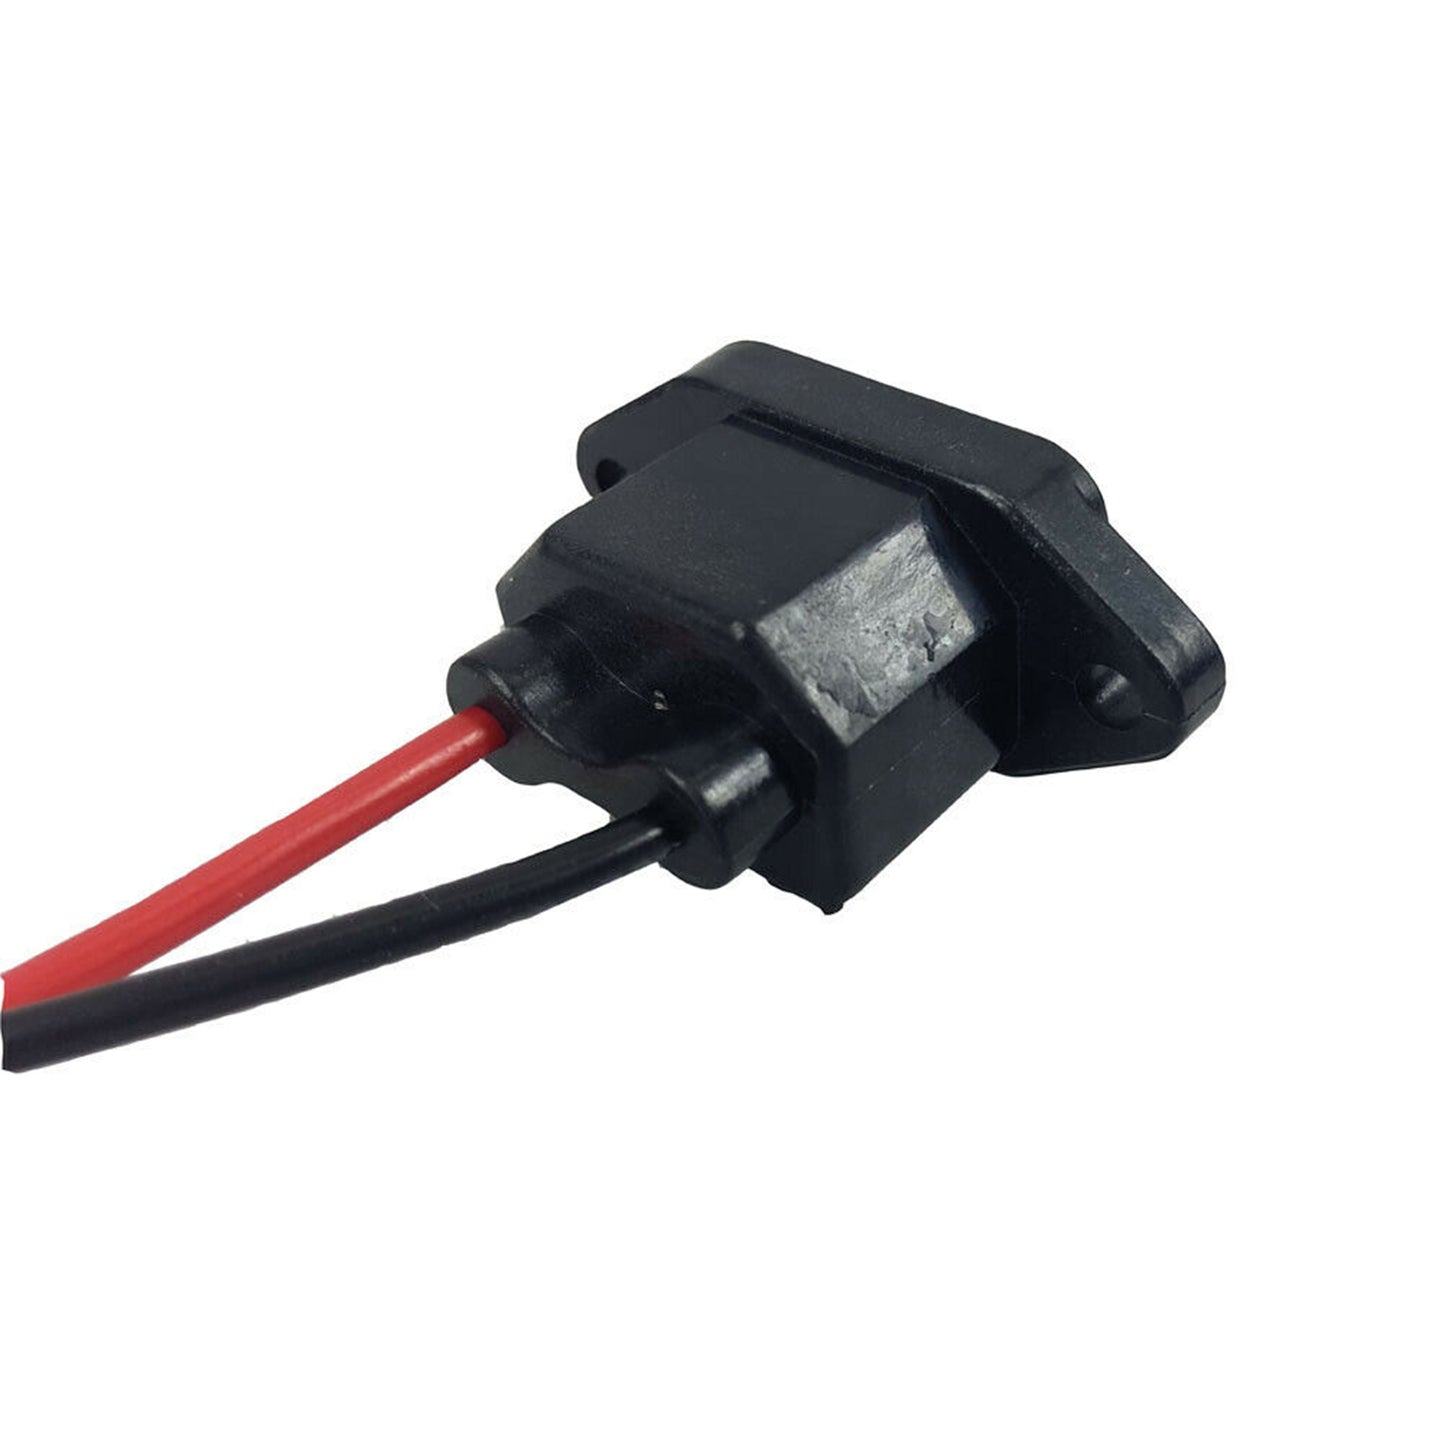 Three-hole Connector for Ebike Bicycle Battery Charger 3 Hole Connector